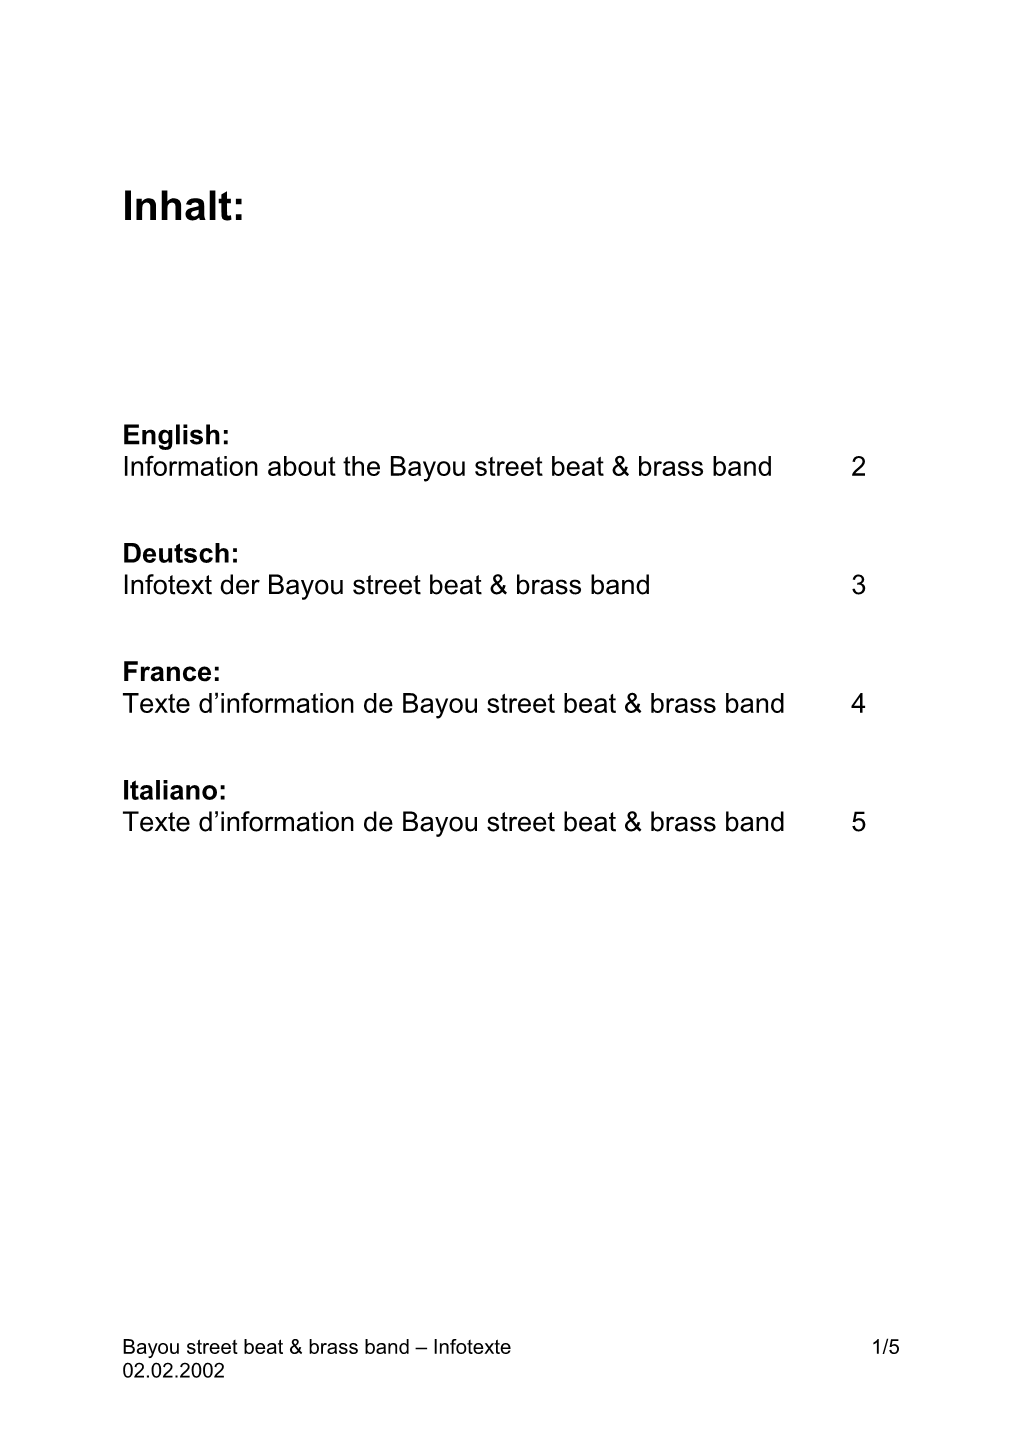 Information About the Bayou Street Beat & Brass Band2